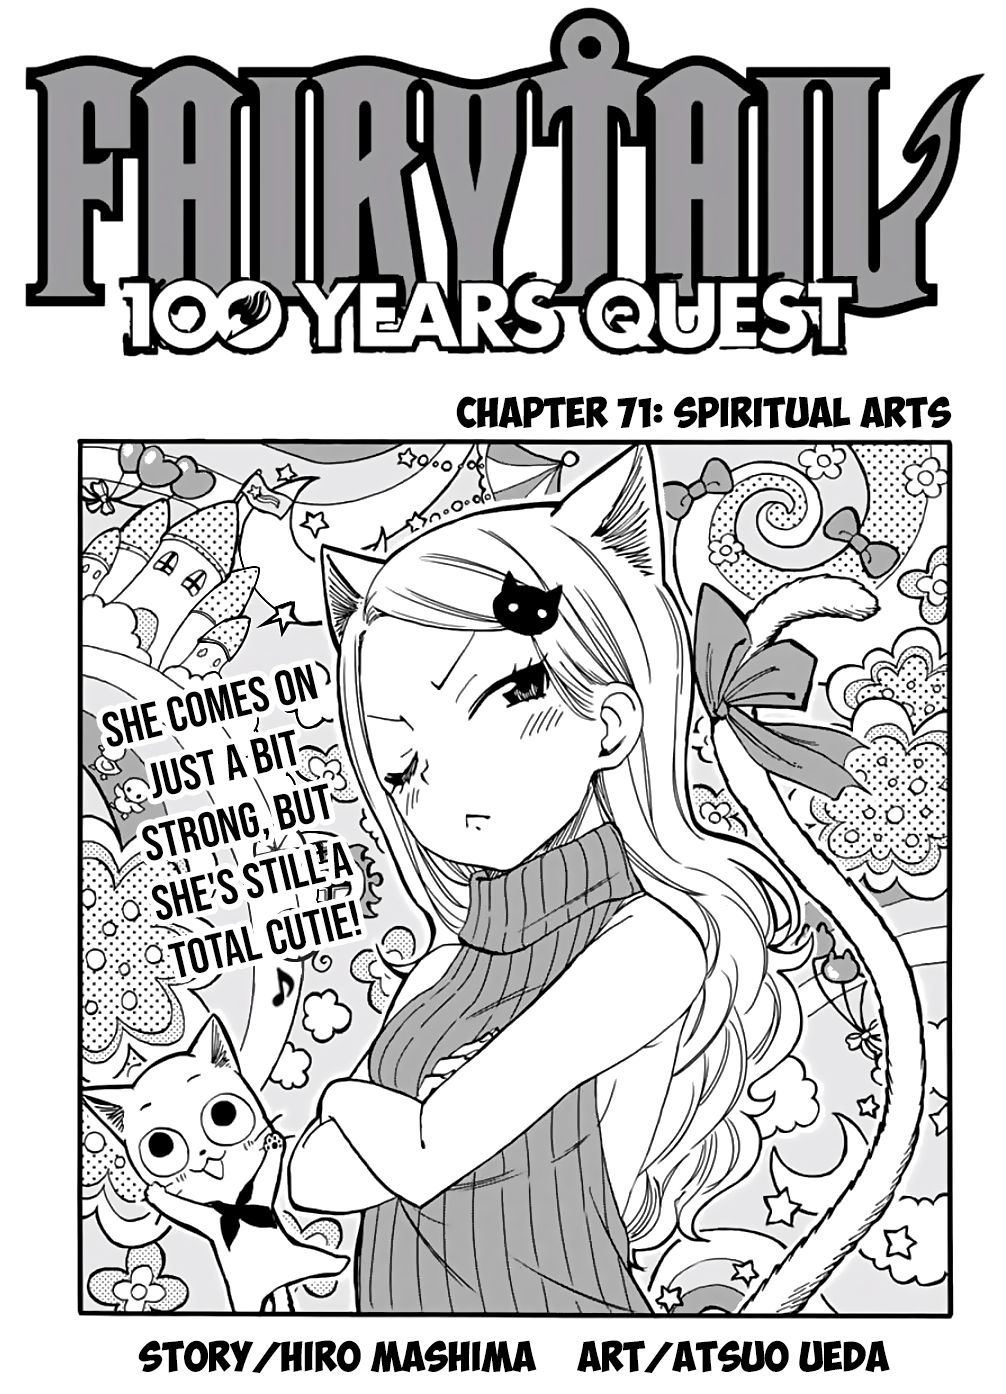 Fairy Tail 100 Years Quest Chap 71